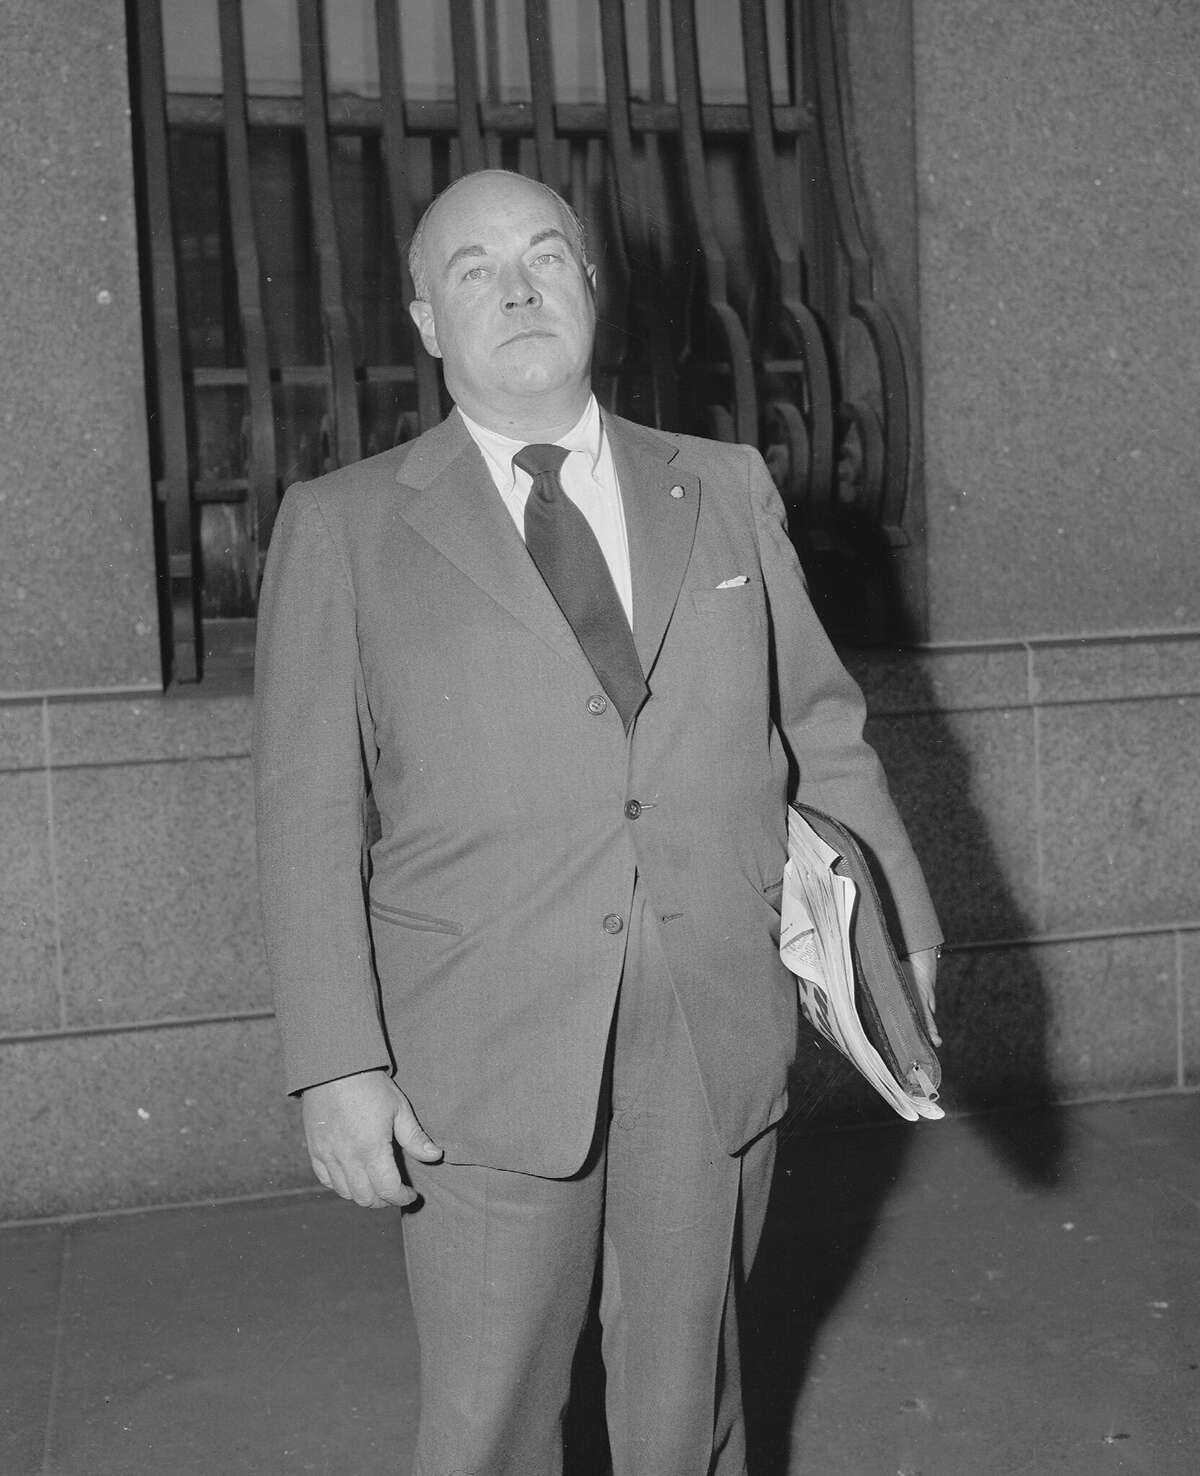 FILE: An undated photo shows George Hunter White, supervisor for the New England area of the Federal Narcotics Bureau, as he enters federal court to go before a grand jury.